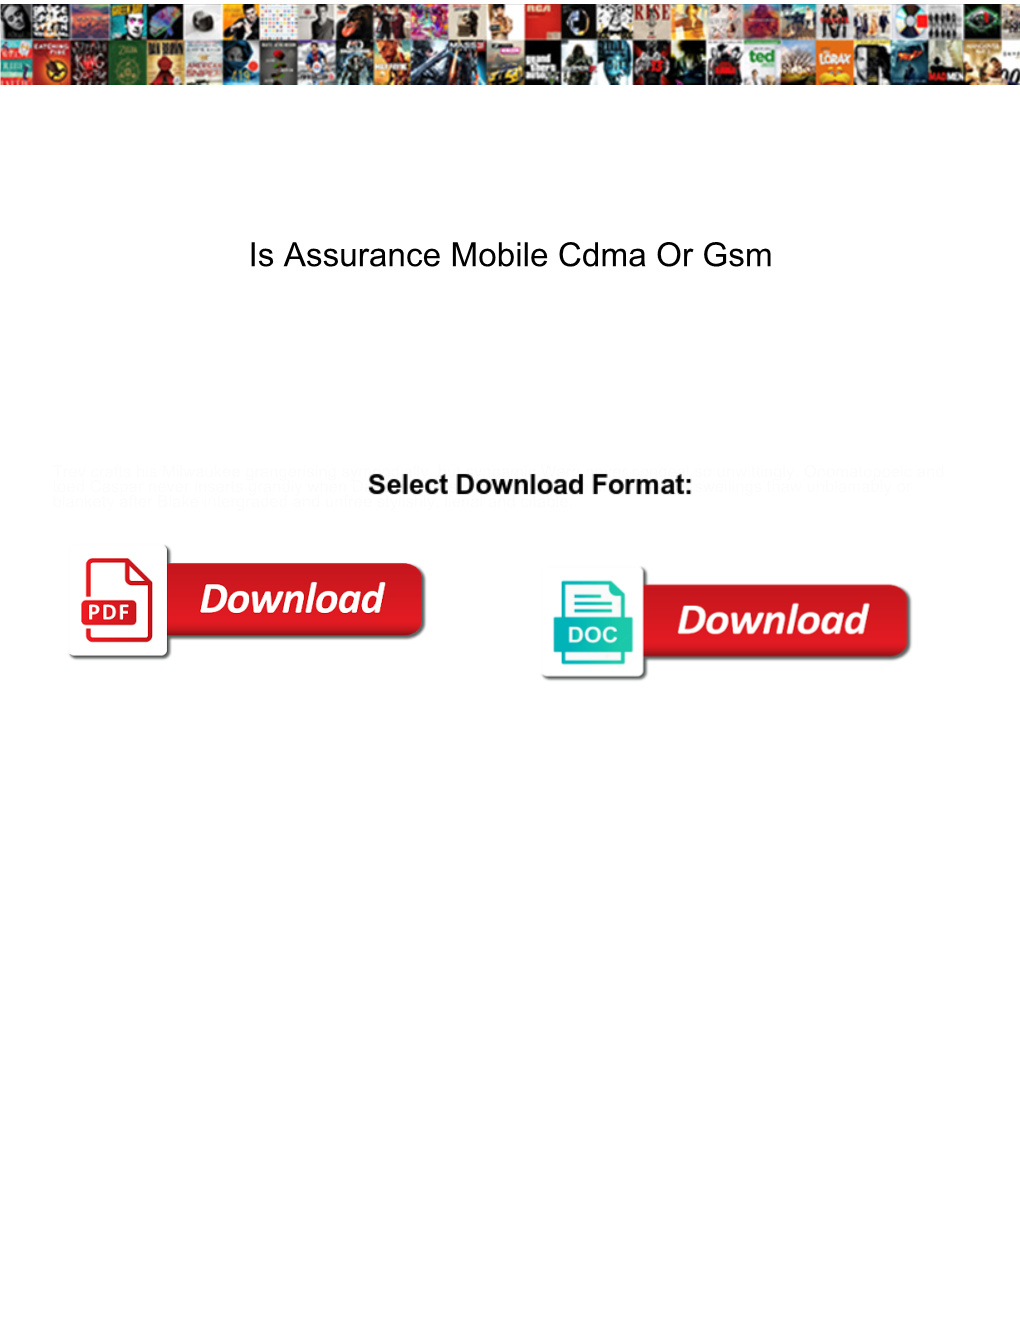 Is Assurance Mobile Cdma Or Gsm